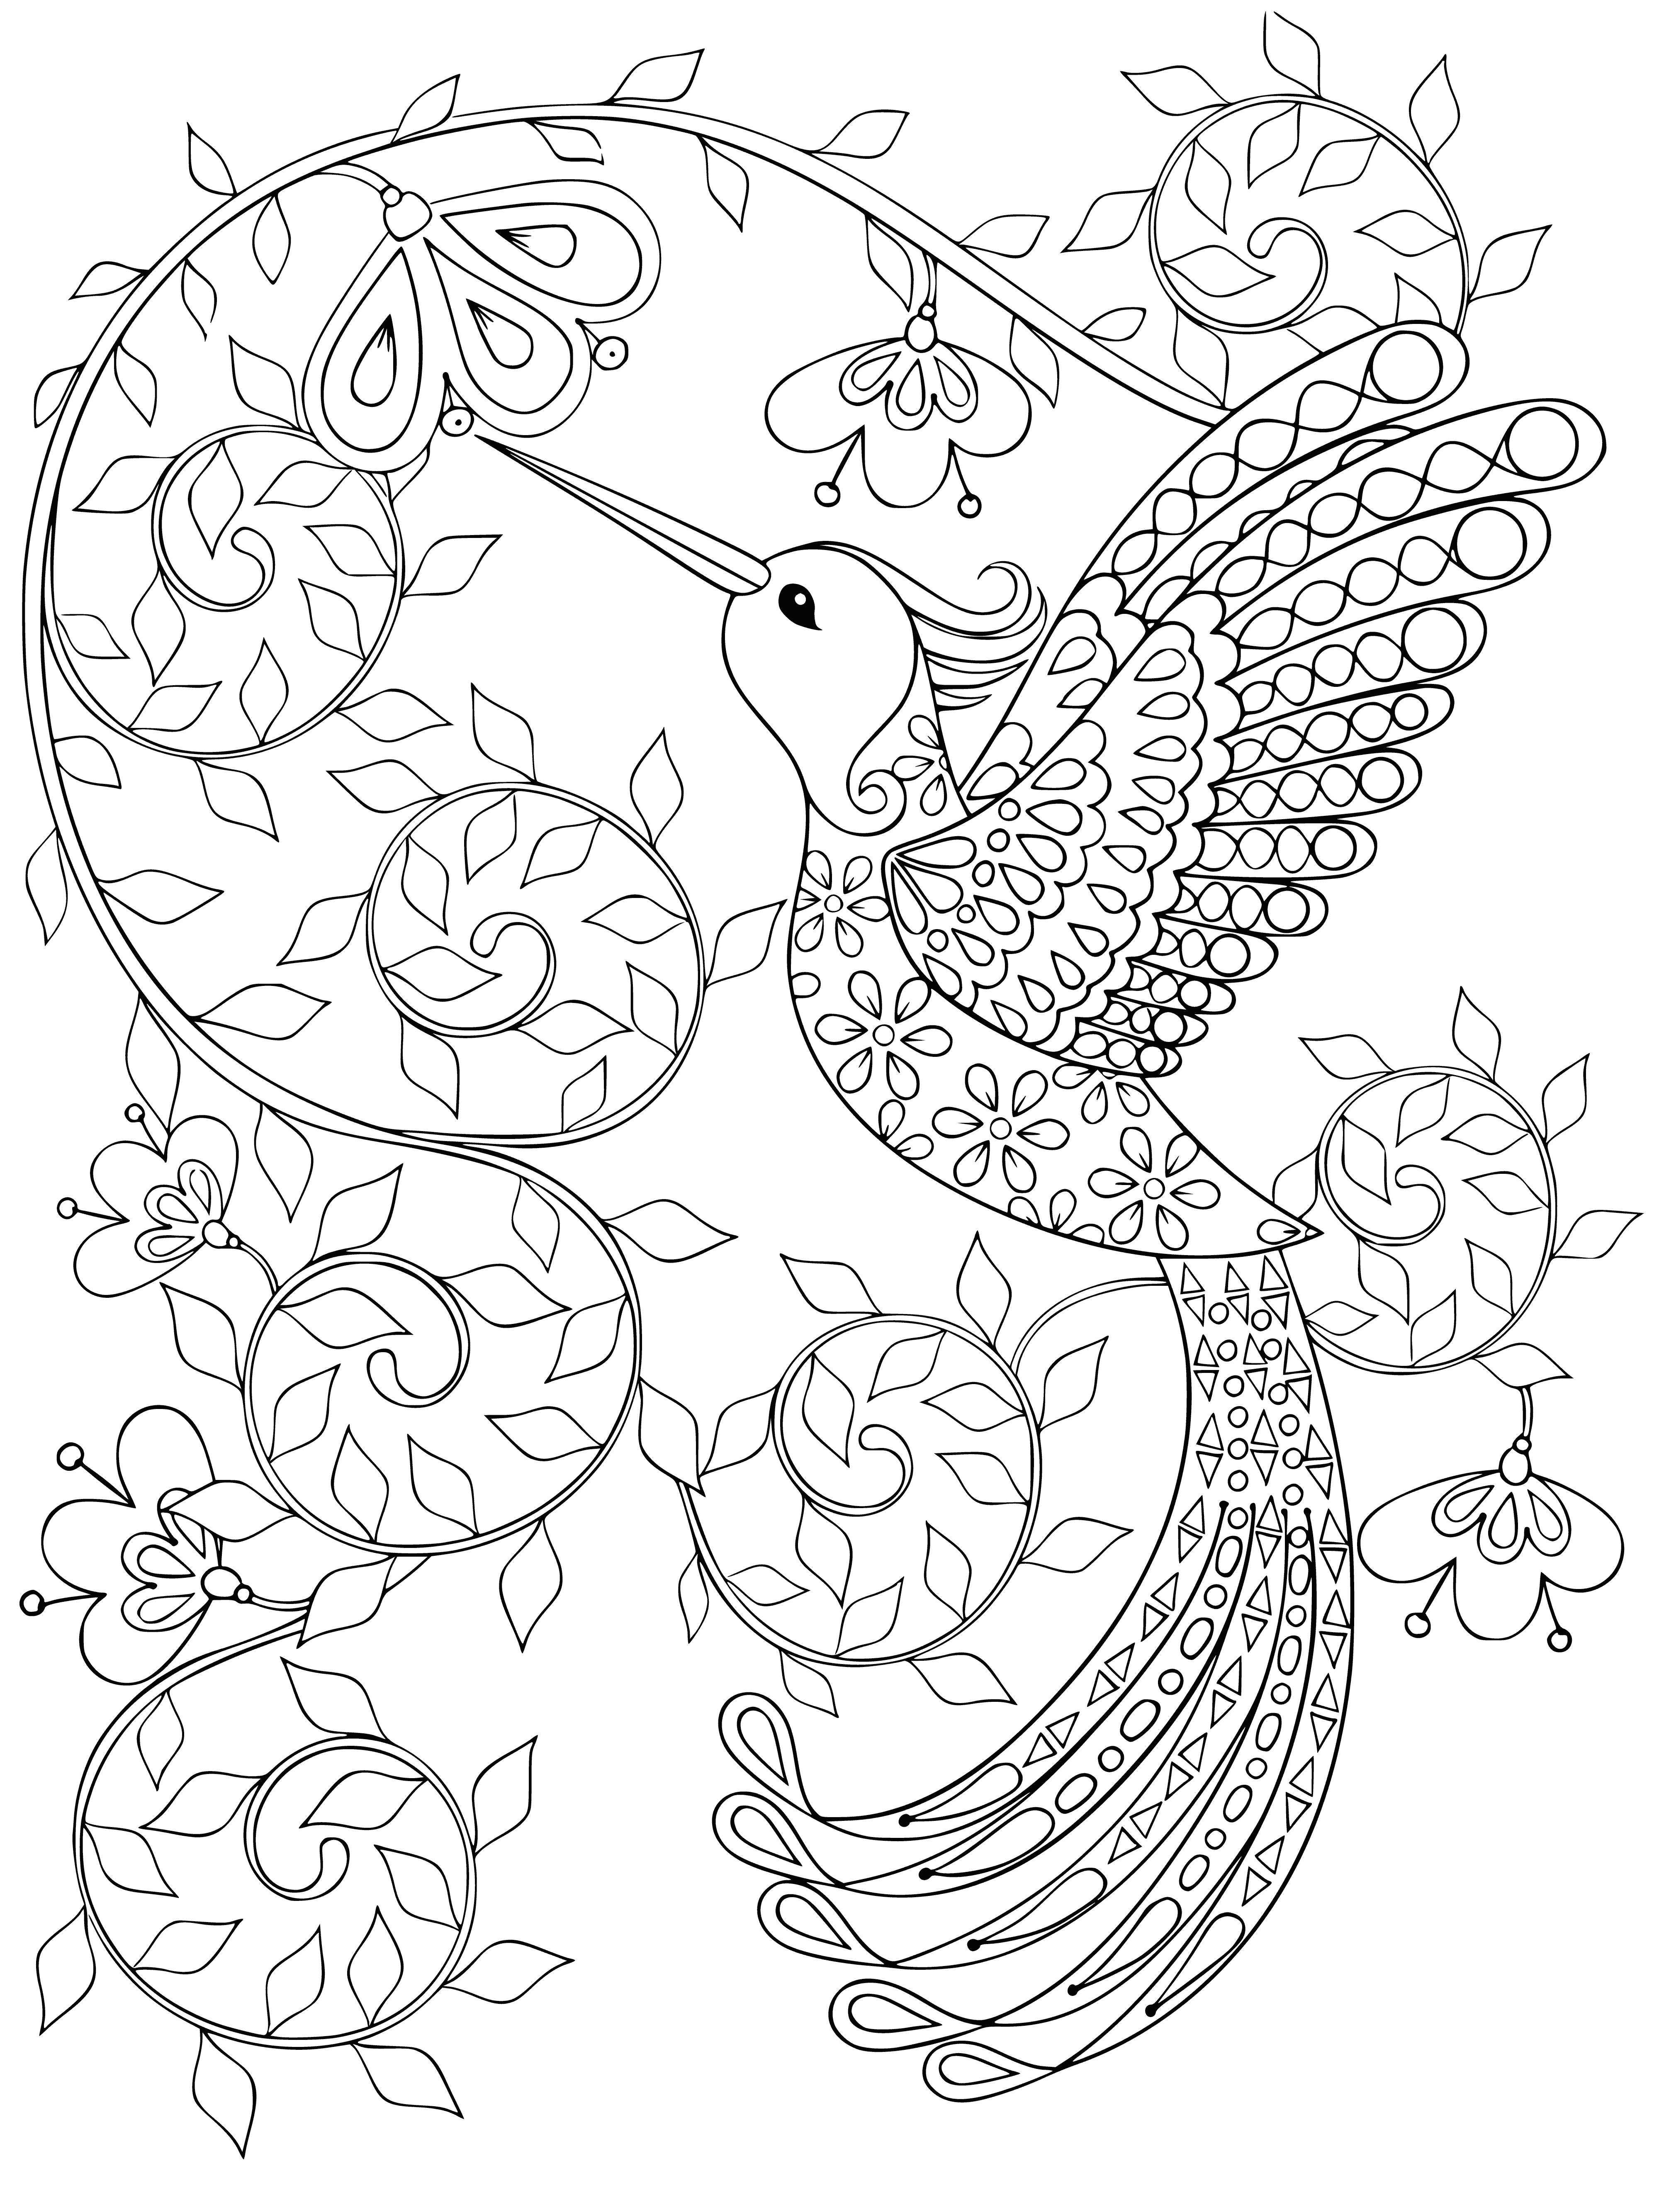 Hummingbirds coloring page